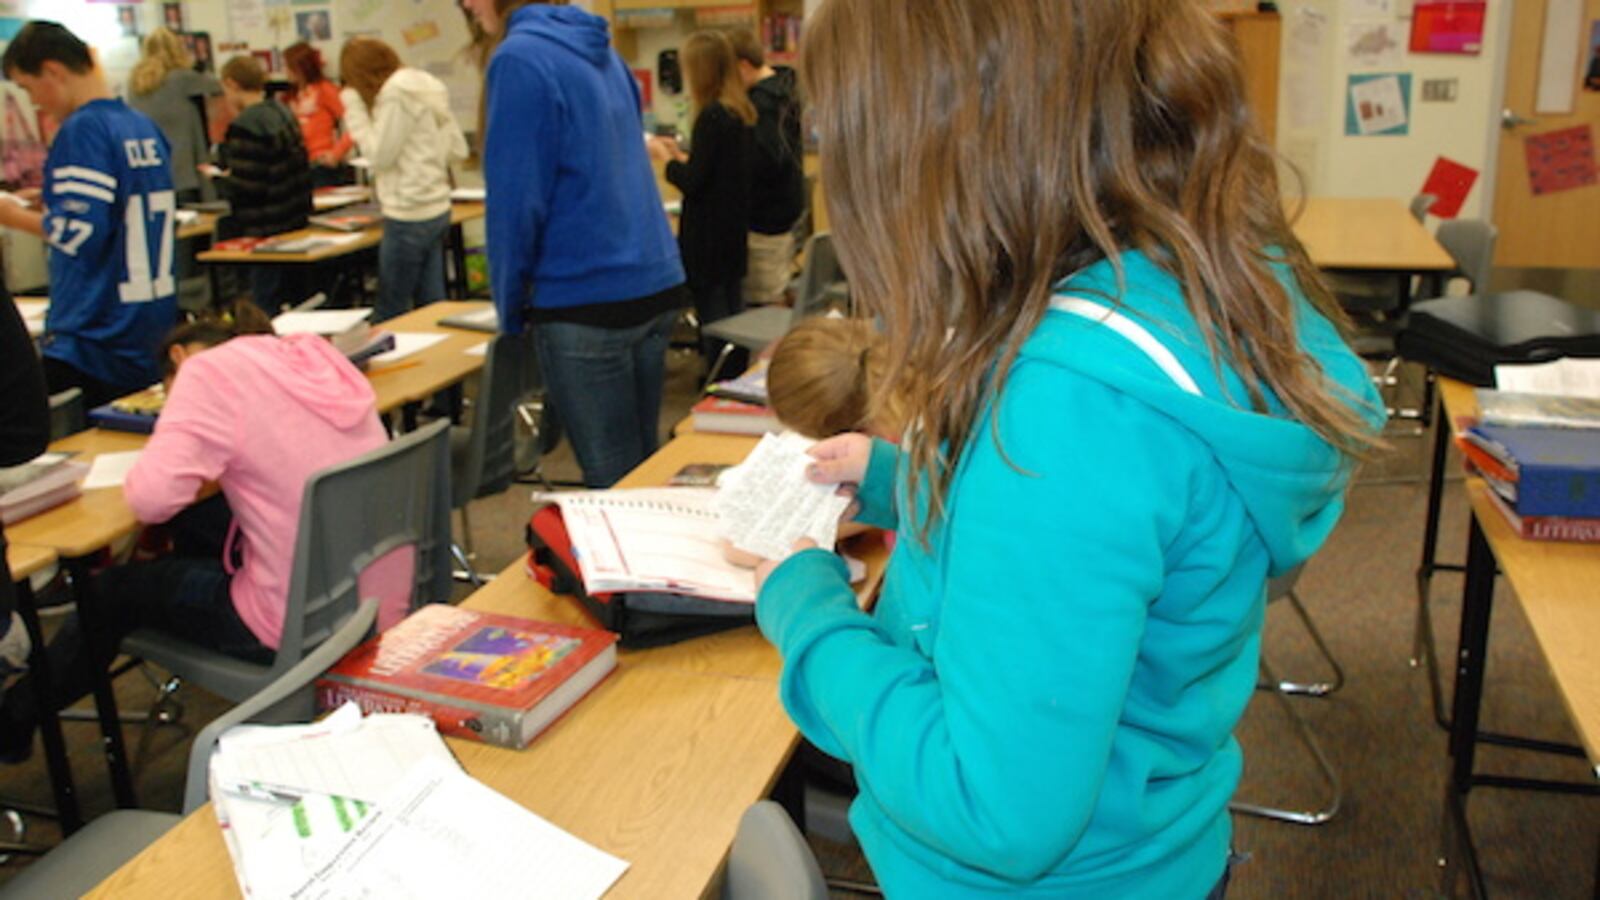 A student at work at Grand Junction's Bookcliff Middle School. Grand Junction undertook district-wide overhauls to reduce the effects of student moves.